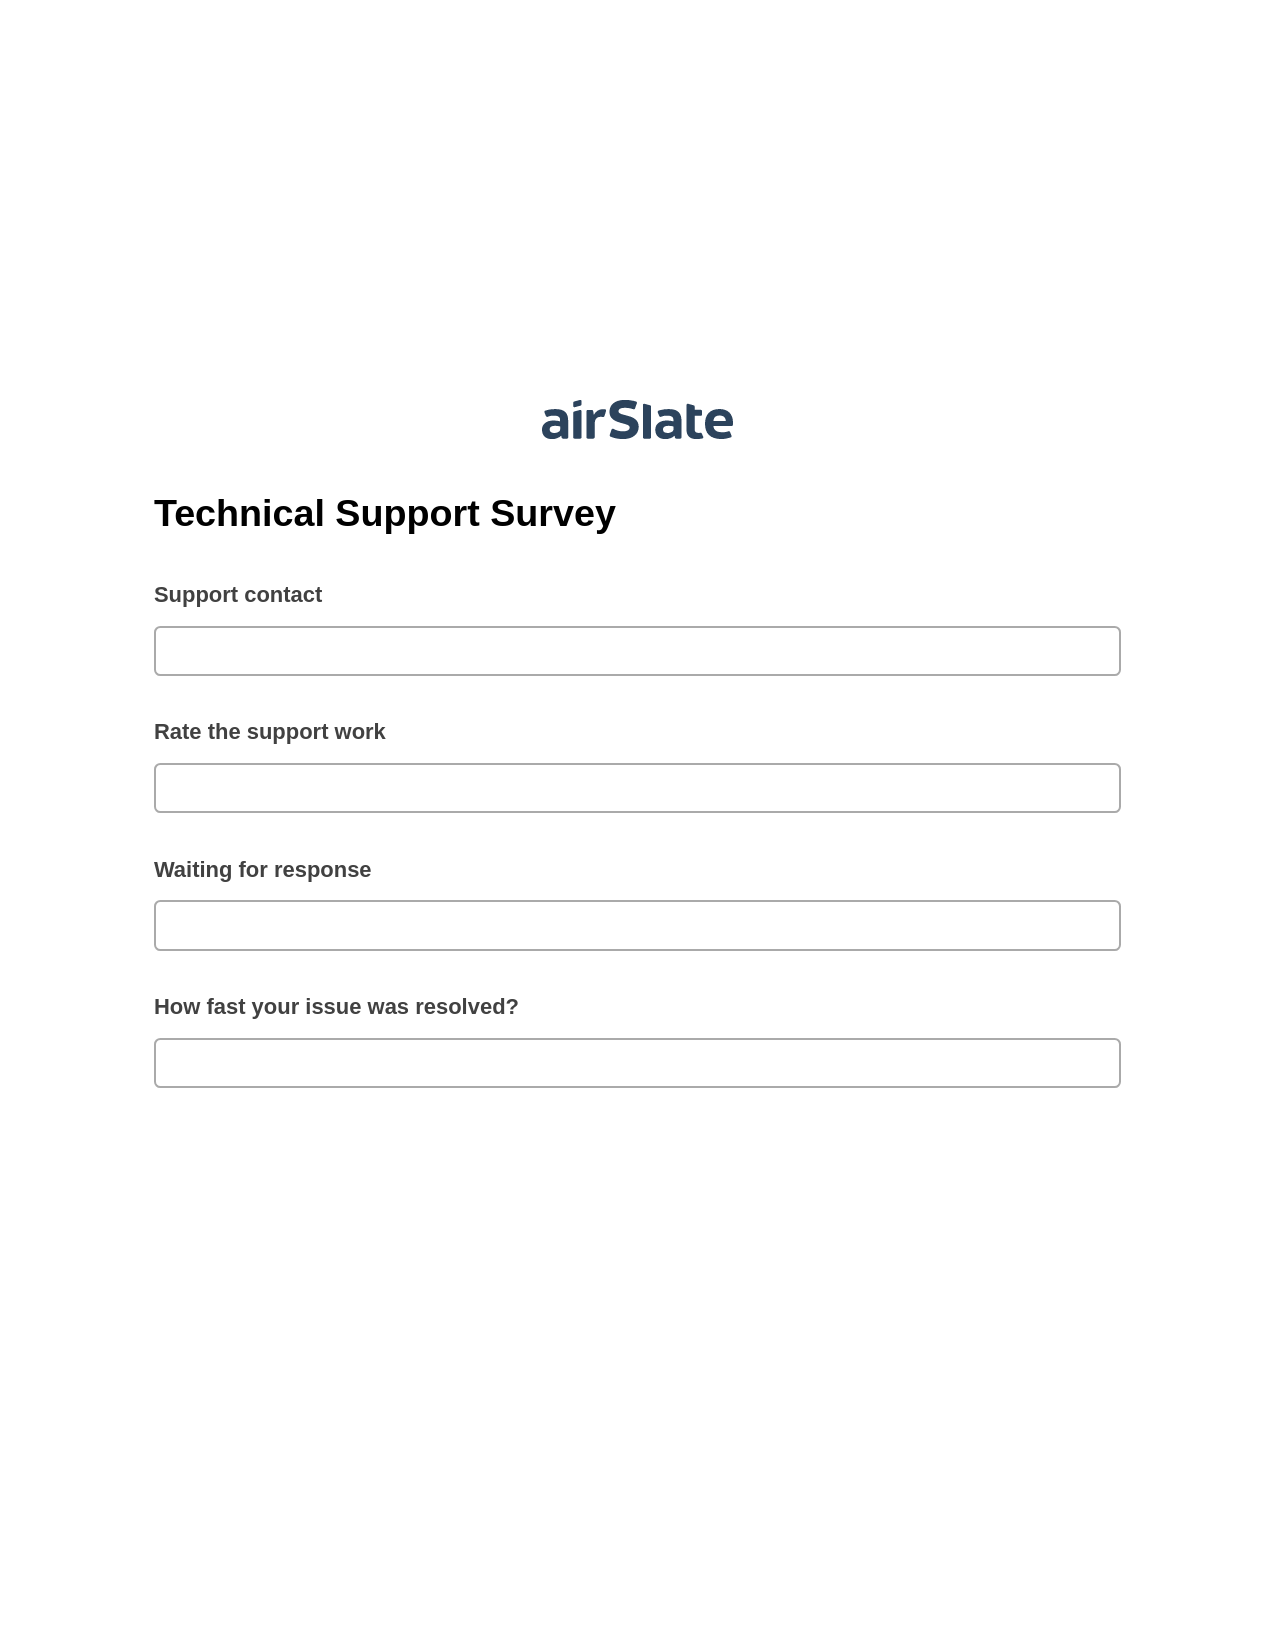 Technical Support Survey Pre-fill from Salesforce Records Bot, Update NetSuite Record Bot, Post-finish Document Bot